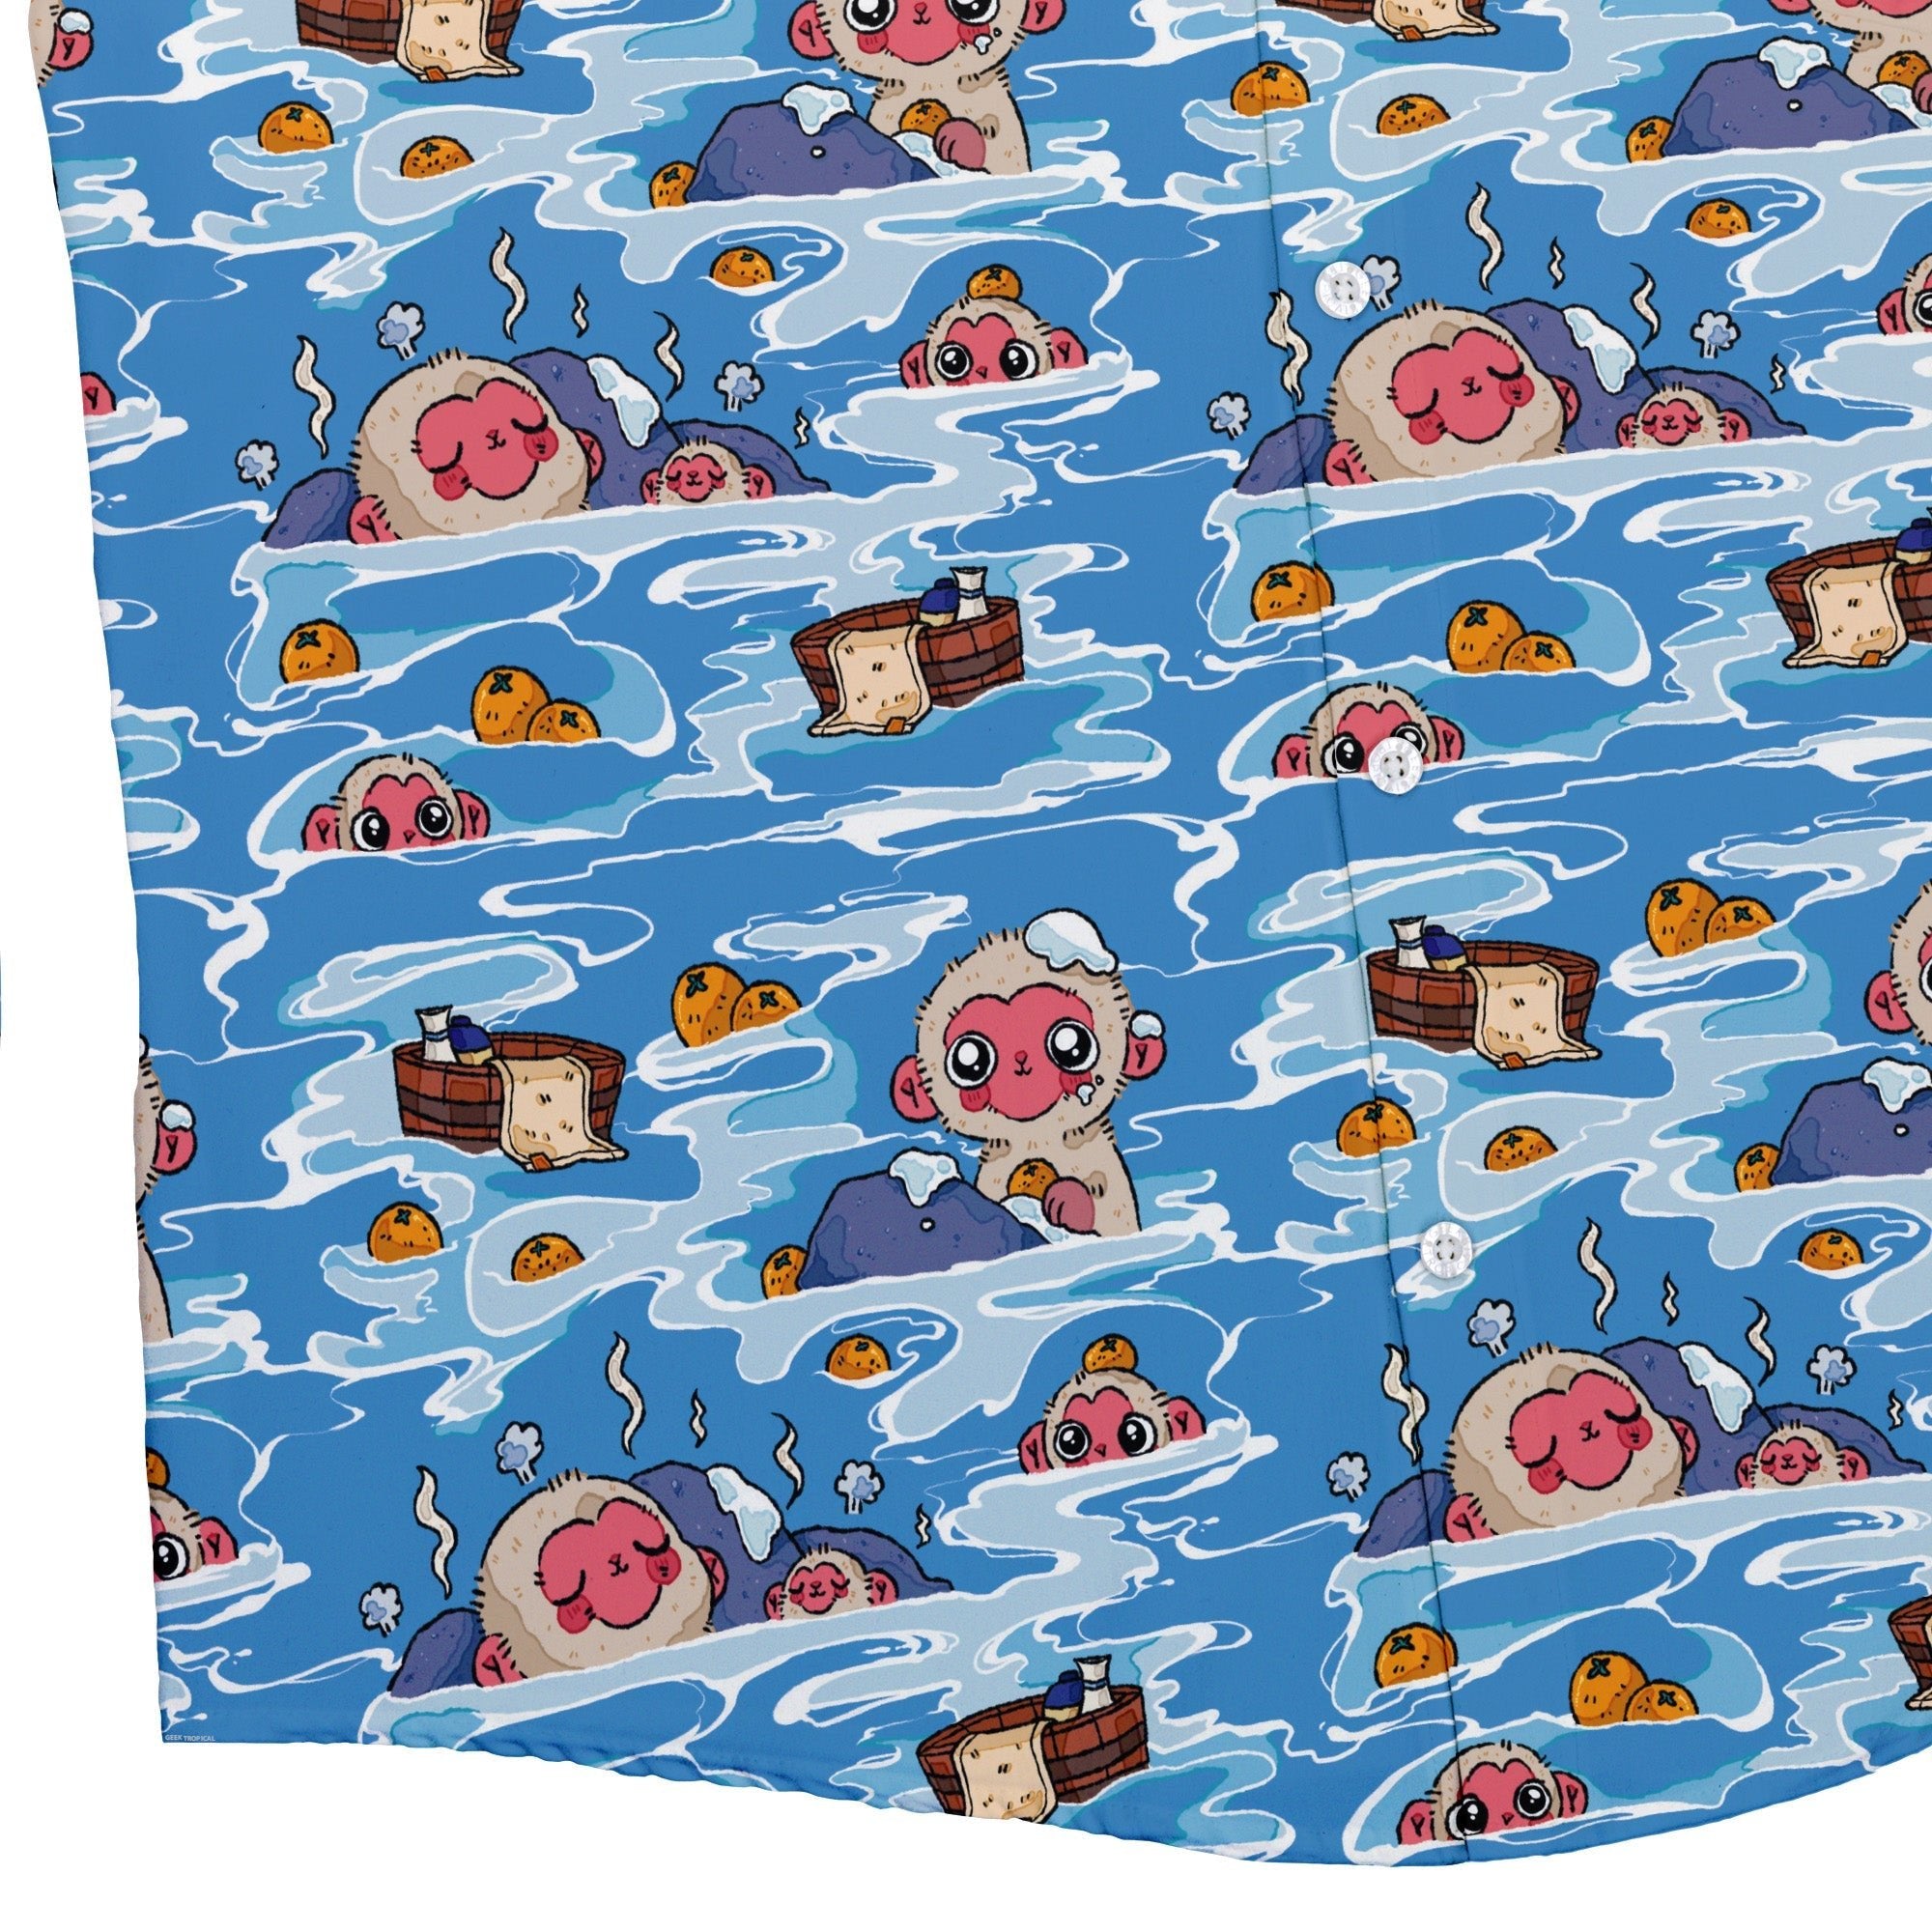 Onsen Snow Monkeys Button Up Shirt - adult sizing - Christmas Print - Design by Ardi Tong